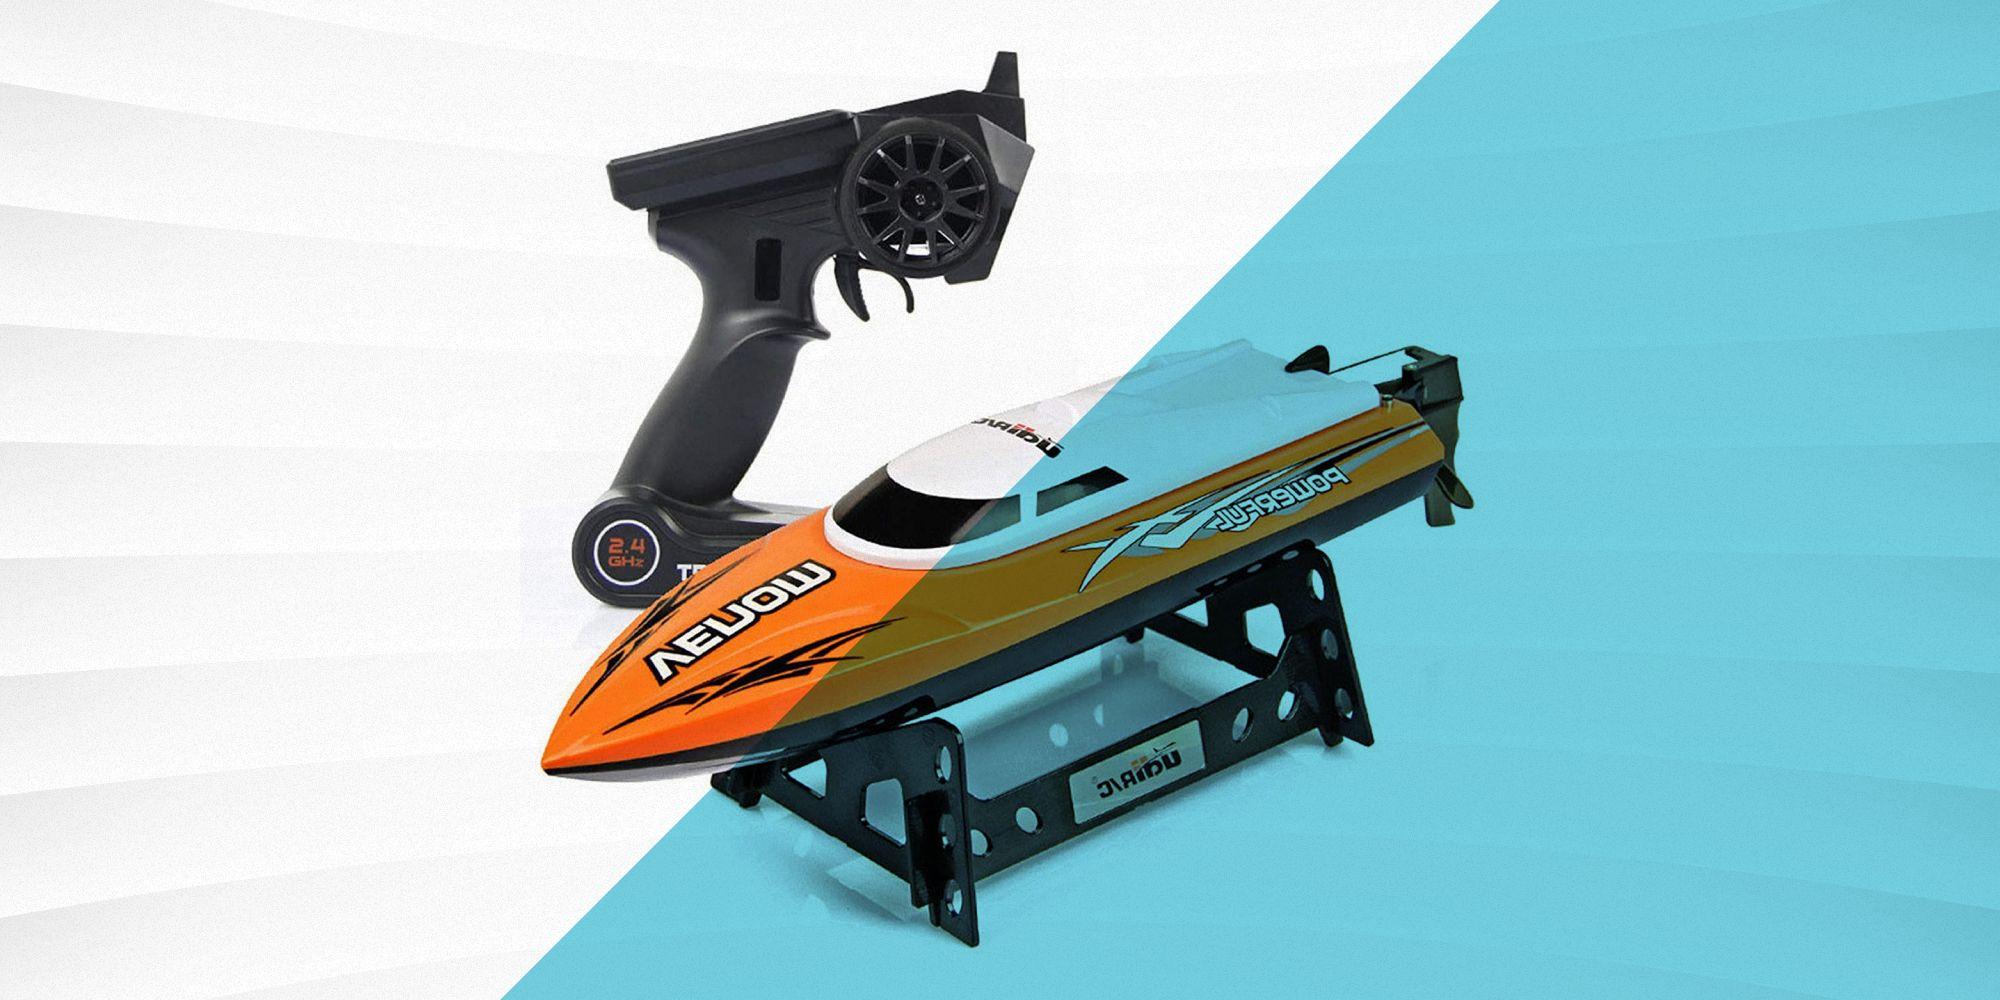 Budget Rc Boat: Top Budget RC Boats - Fun and Affordable Options for Enthusiasts